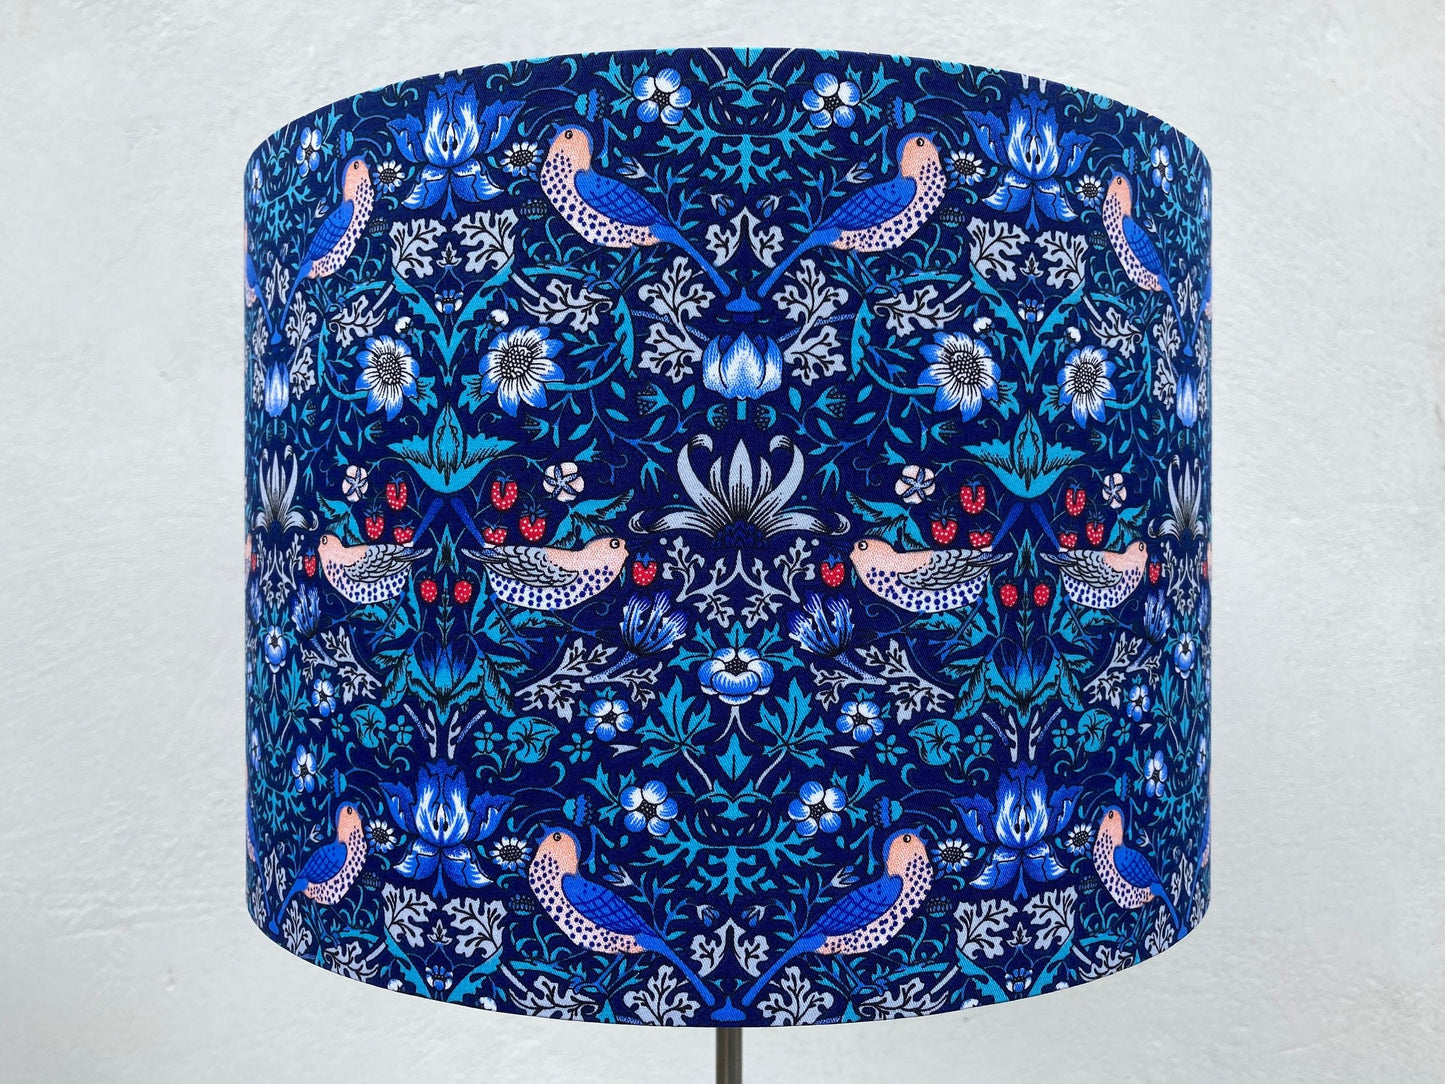 Floral Bird Lampshade William Morris Strawberry Thief Style Fabric for Table Lamps or Ceiling Lights